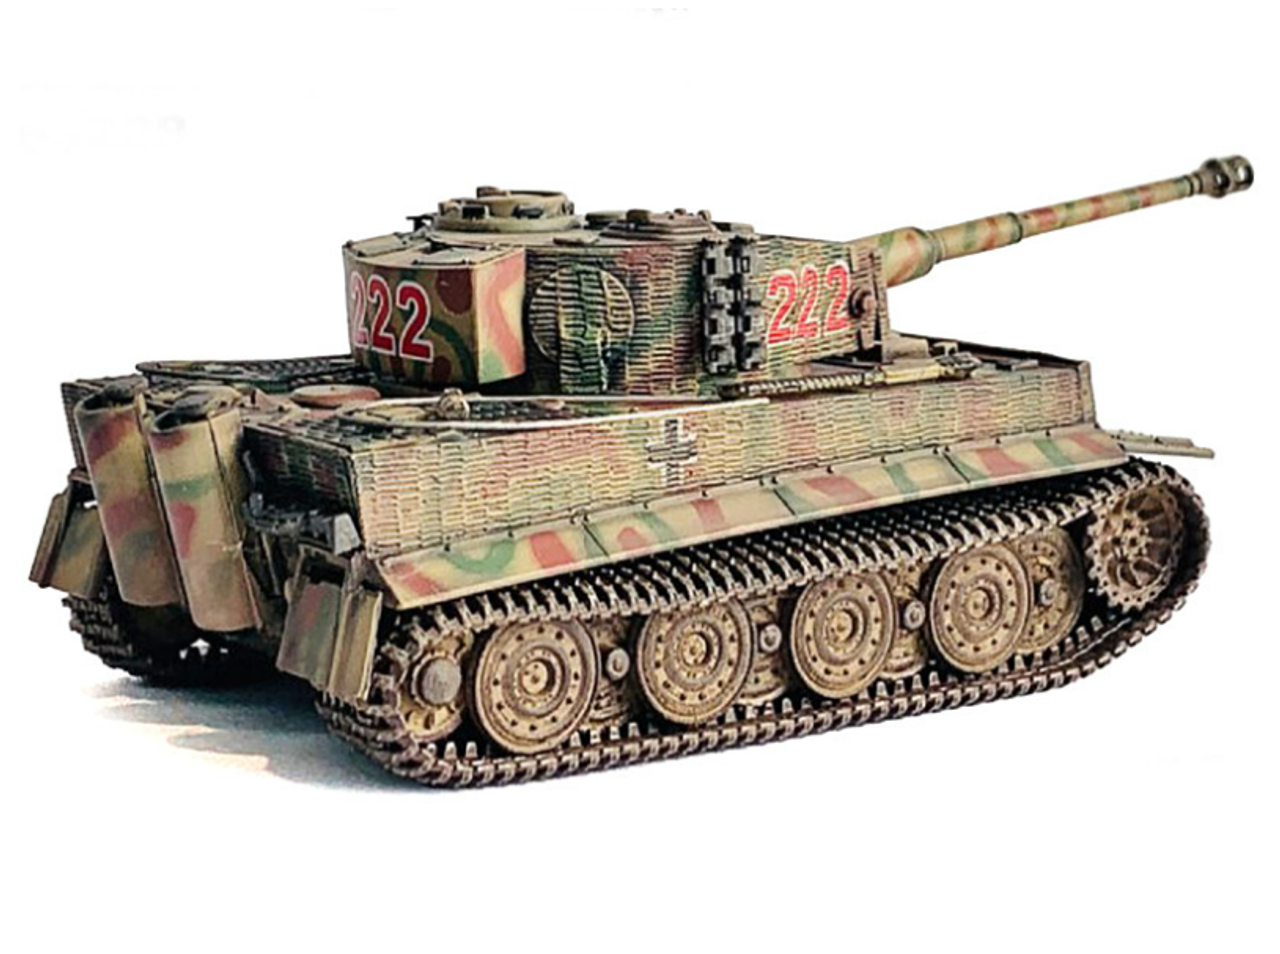 Germany Tiger I Late Production with Zimmerit Tank "Wittmann's Tiger #212 s.Pz.Abt.101 Normandy" (1944) "NEO Dragon Armor" Series 1/72 Plastic Model by Dragon Models